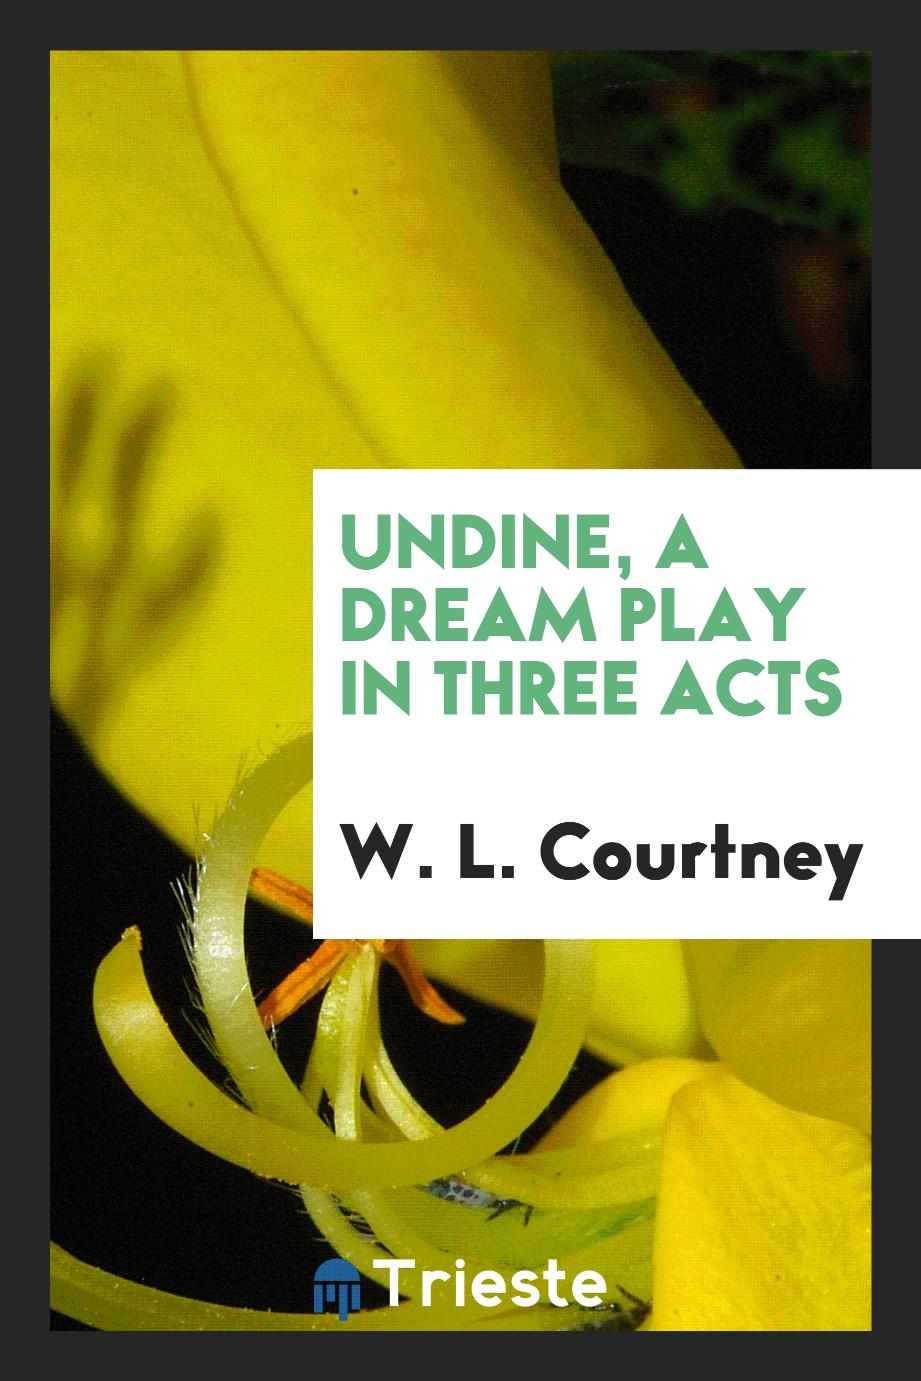 Undine, a dream play in three acts